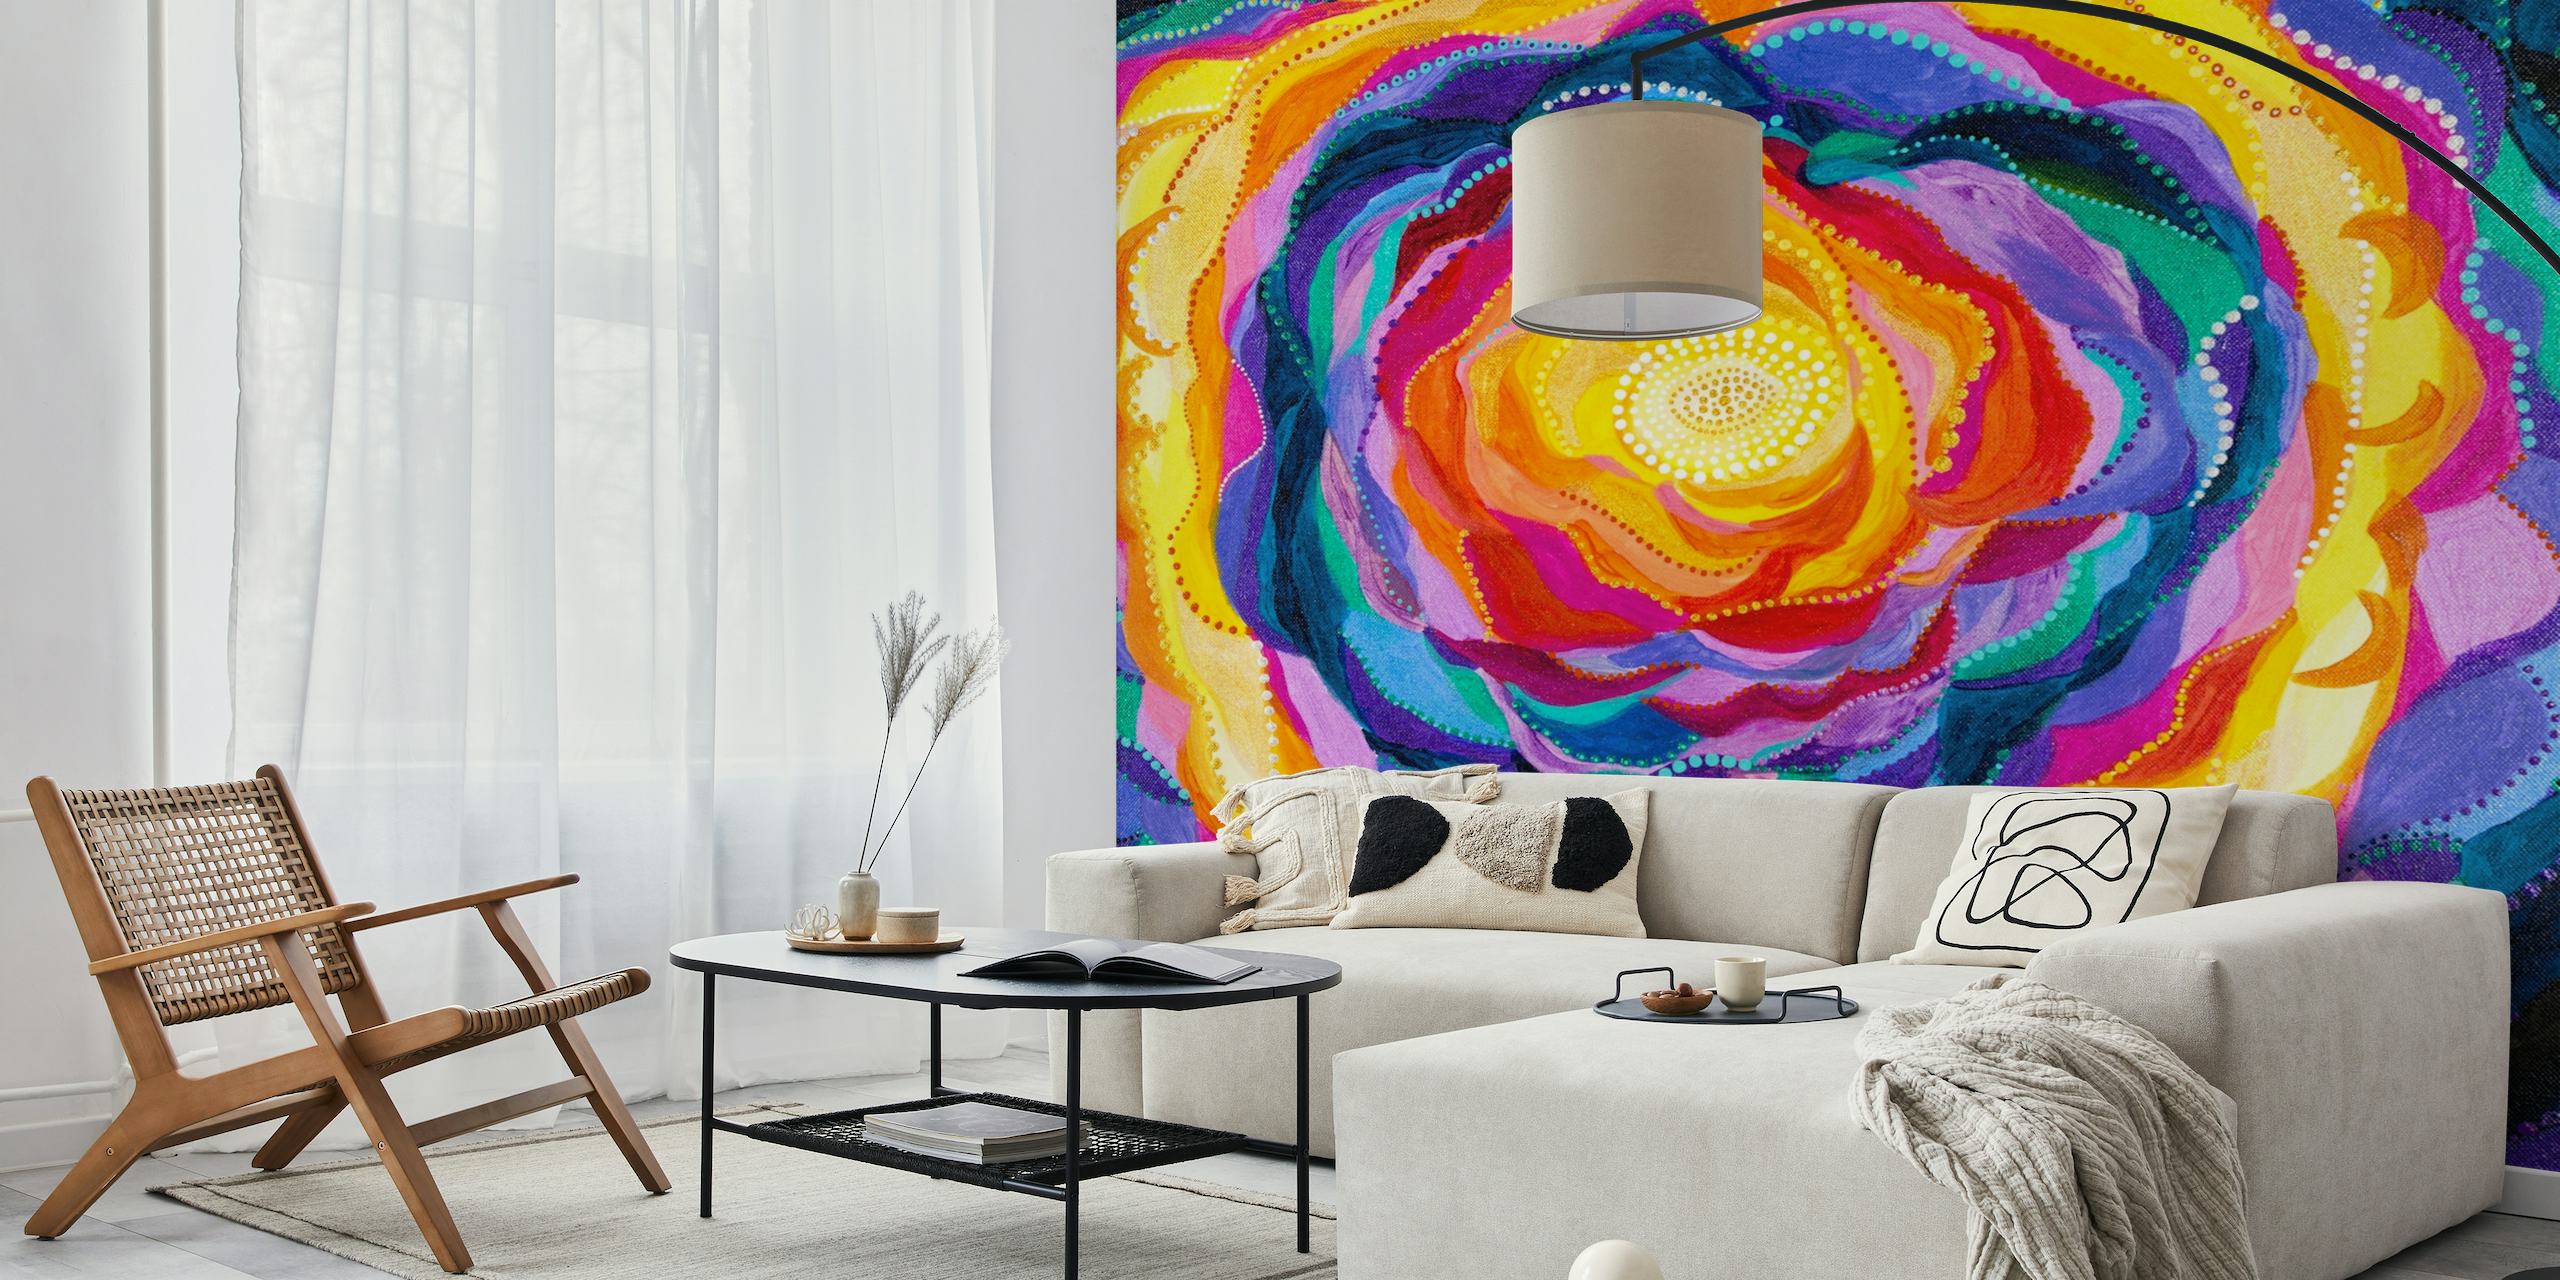 Colorful abstract floral wall mural 'Bloom' with vivid swirling patterns